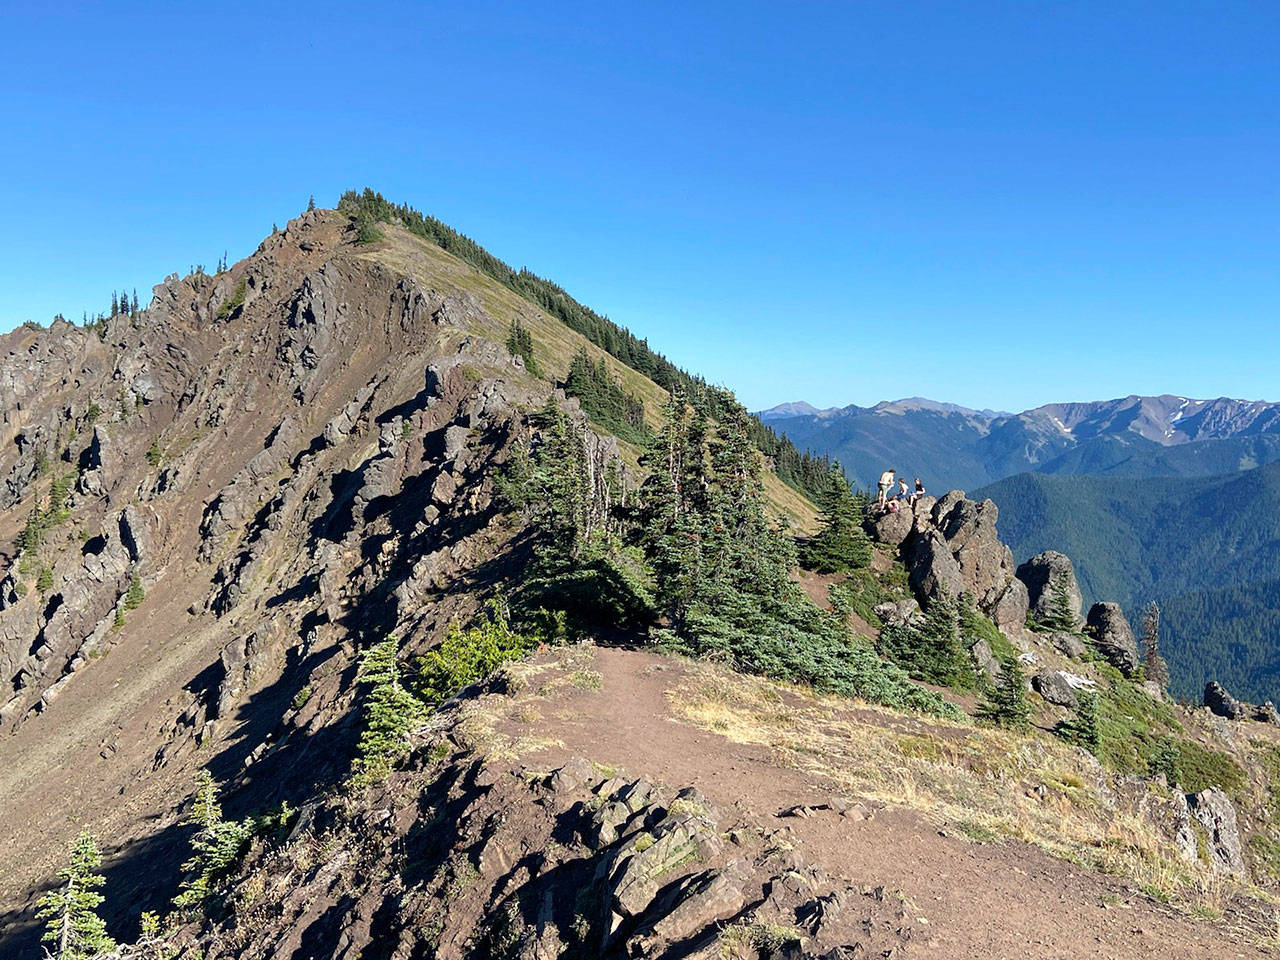 Hikers stop to rest on Klahhane Ridge at the top of Switchback trail on Friday, Aug. 28. Photo by Rob Ollikainen/Olympic Peninsula News Group